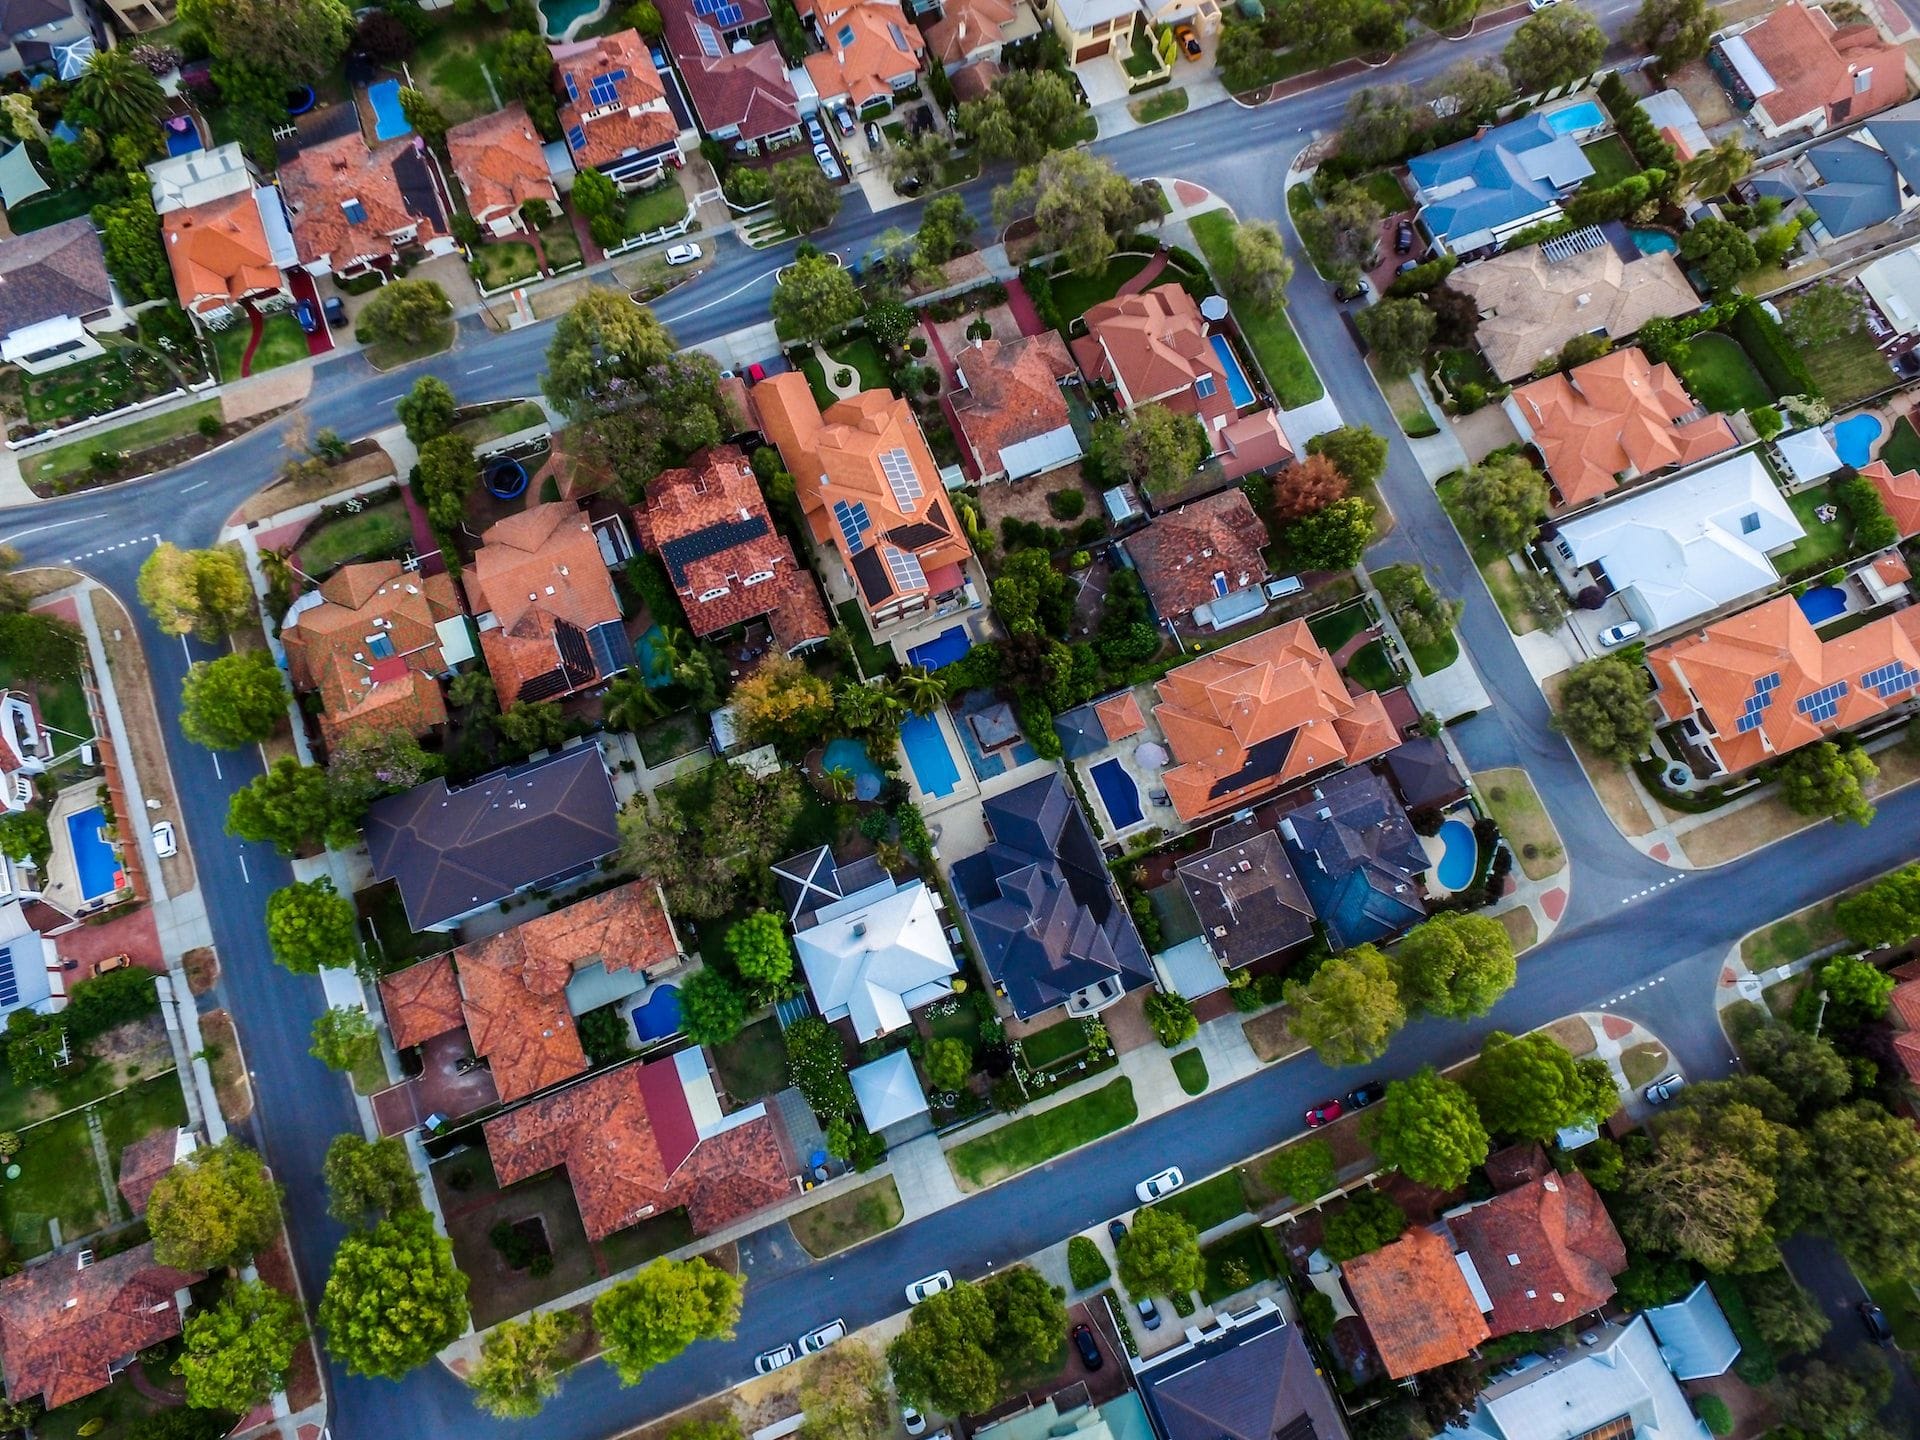 Shine Lawyers eyes potential class action against Aussie Home Loans over 'worthless' insurance